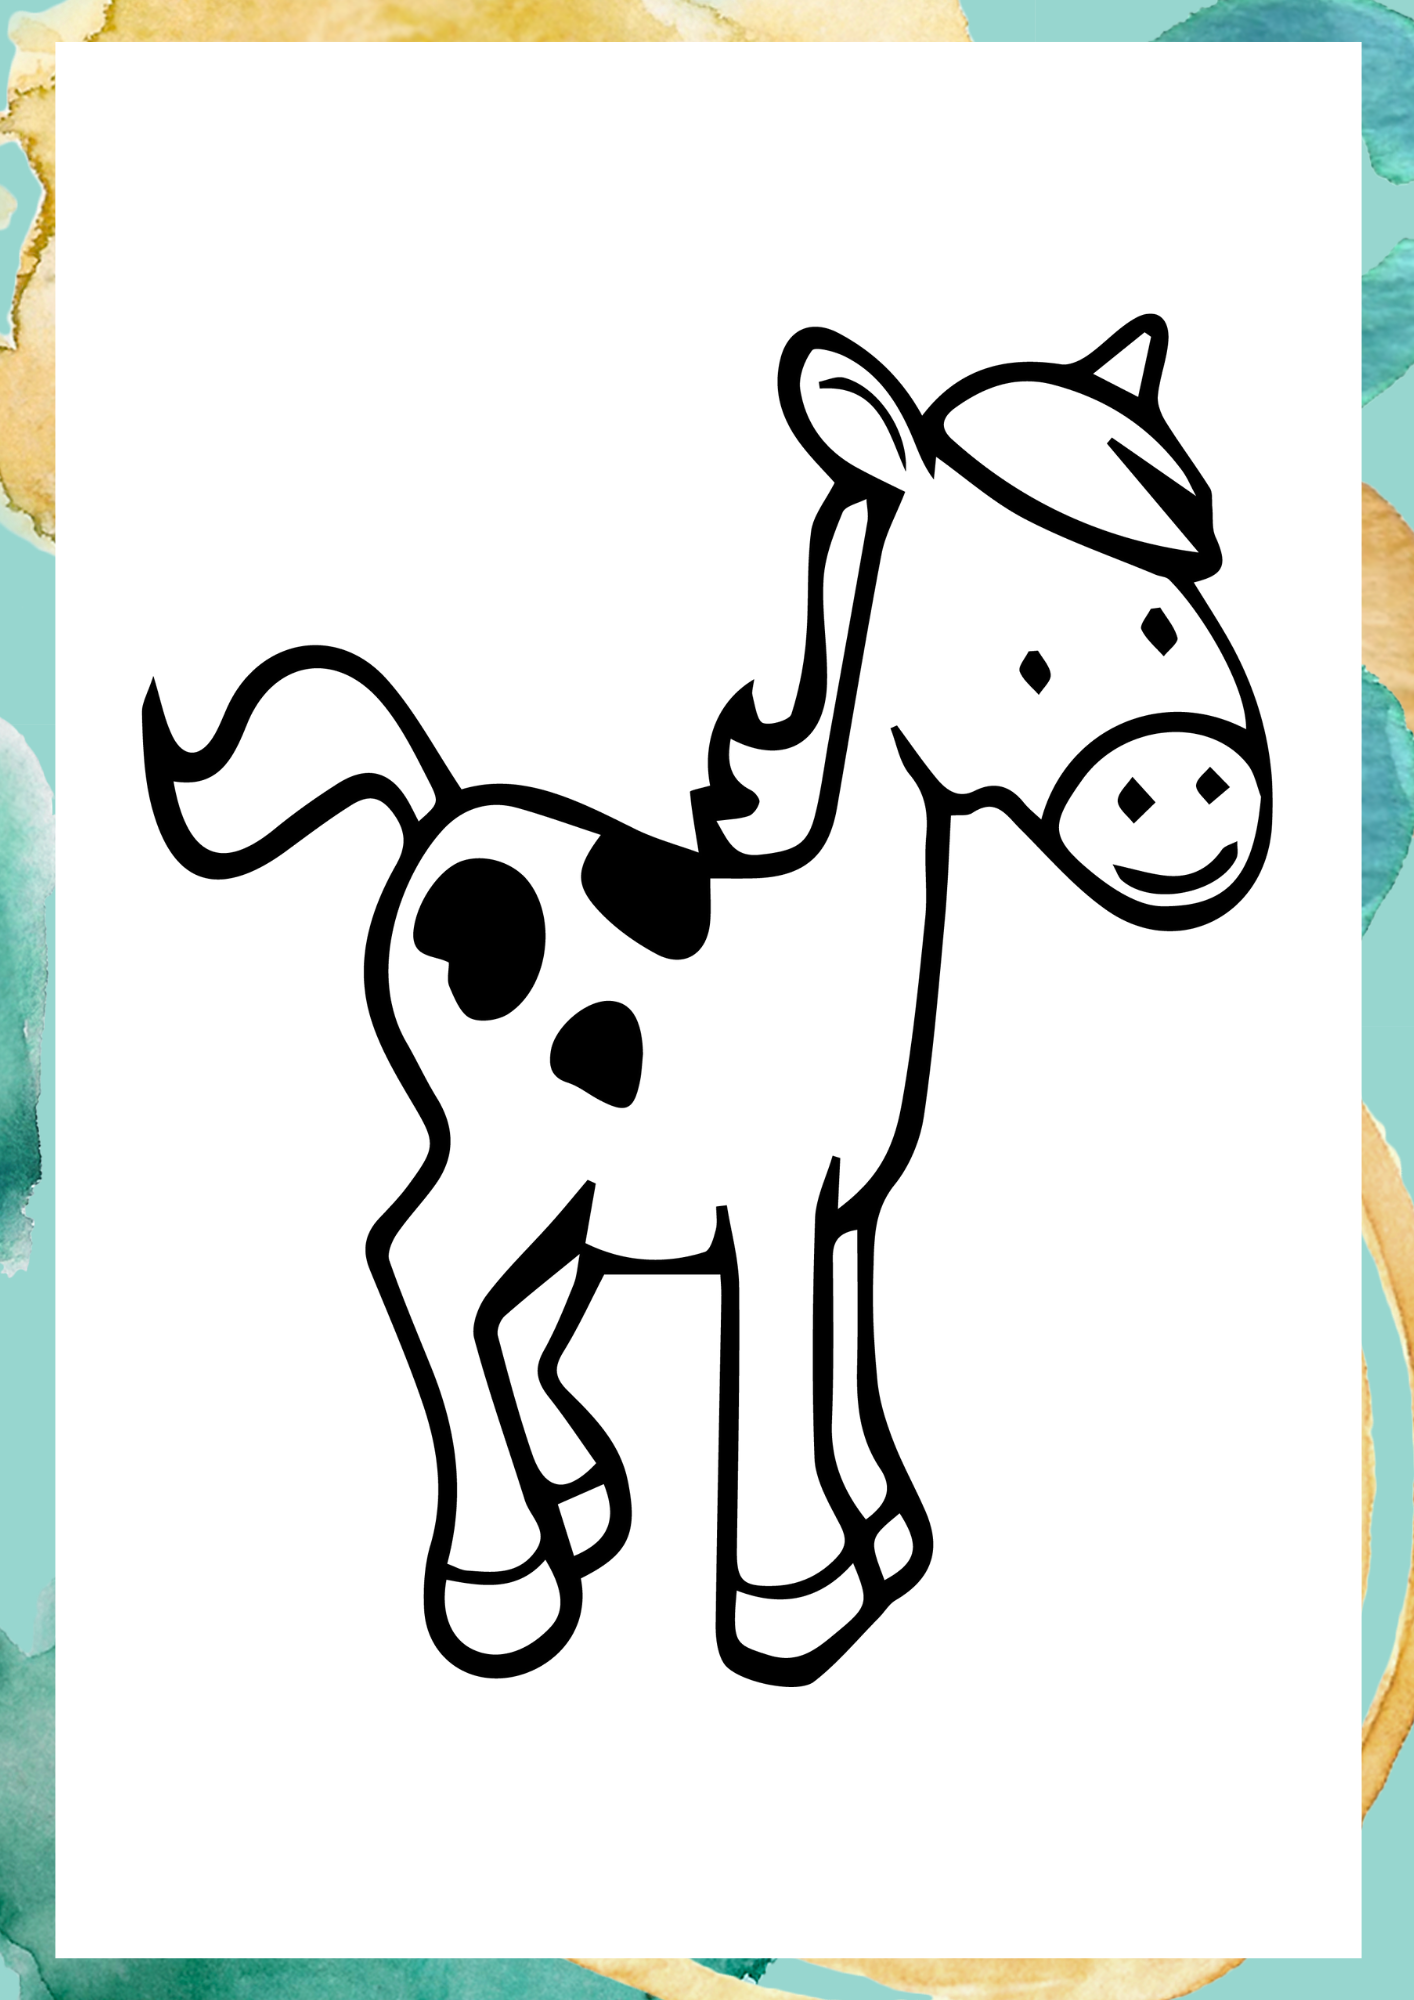 horse coloring page, animal coloring page, coloring page, coloring page for toddlers, Coloring Page, coloring sheet, happy color, colouring, free coloring pages, coloring pages for kids, printable coloring pages, cute coloring pages, colouring pages, colouring to print, free printable coloring pages, free coloring pages for kids, easy coloring pages, coloring sheets